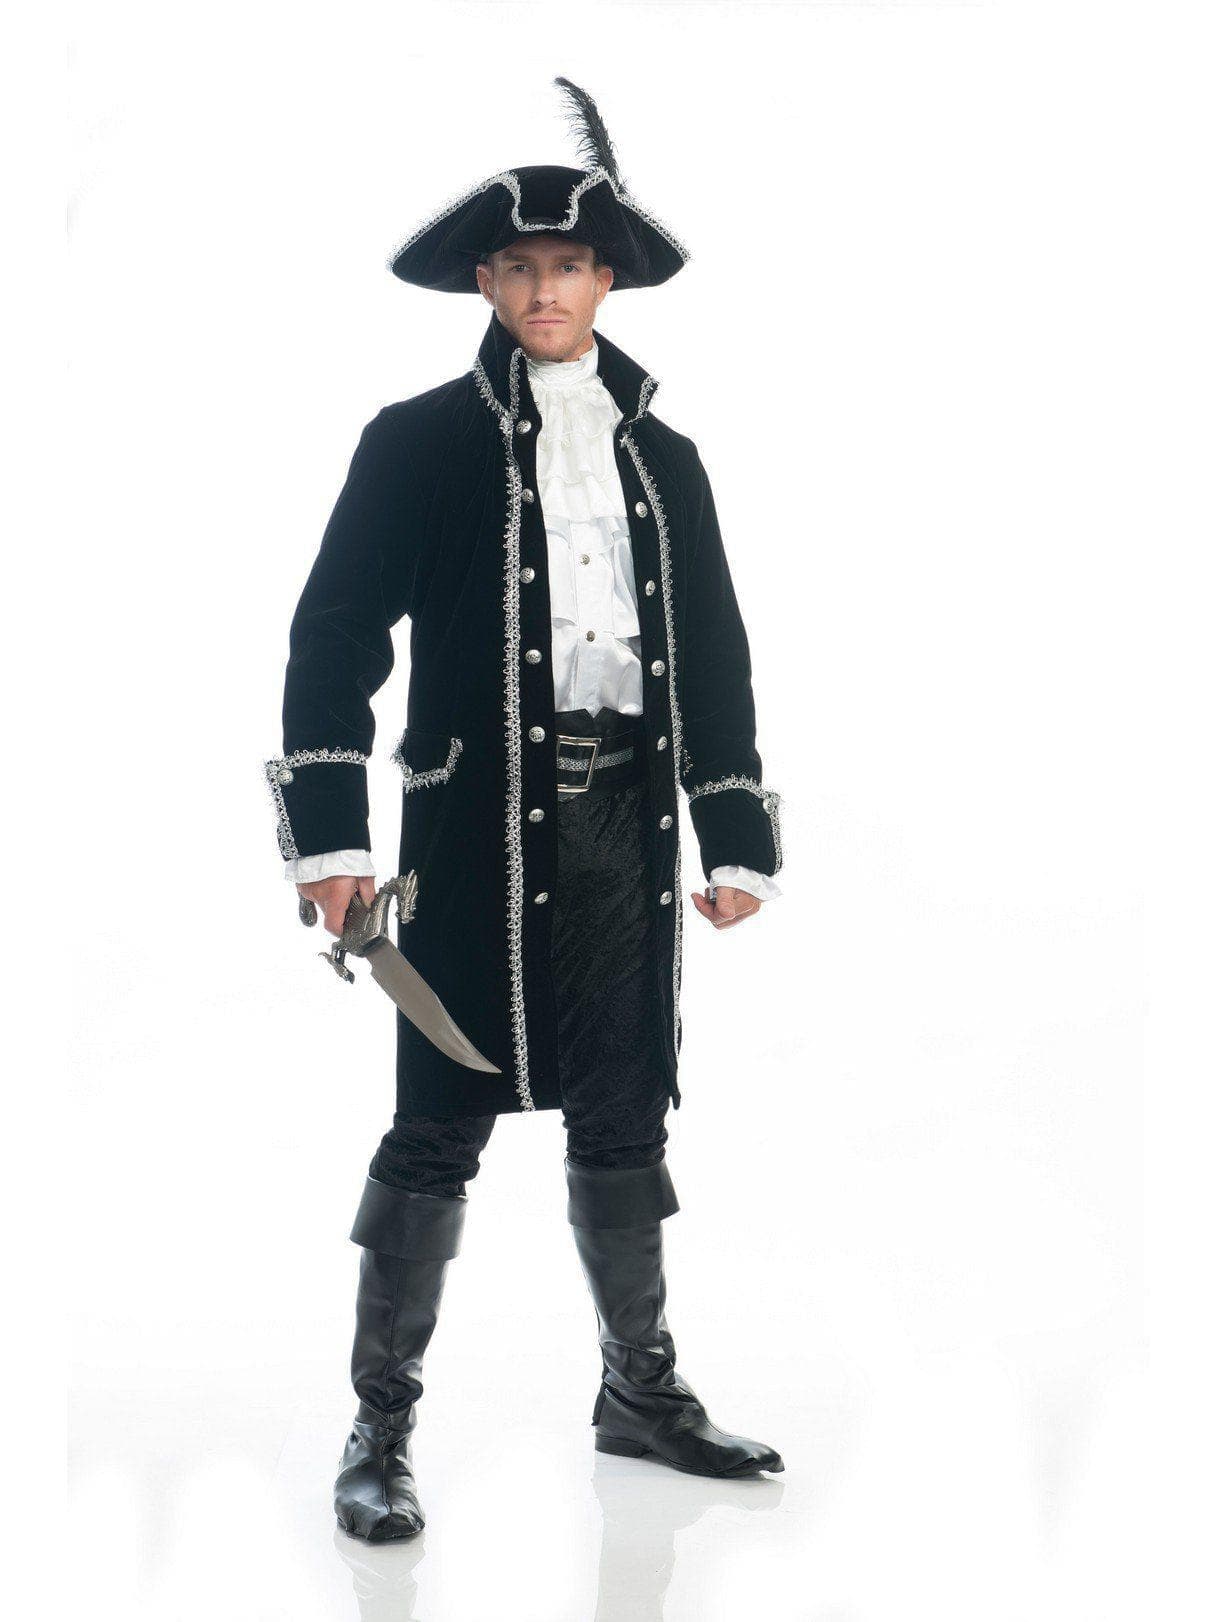 Adult Ruthless Pirate Costume - costumes.com